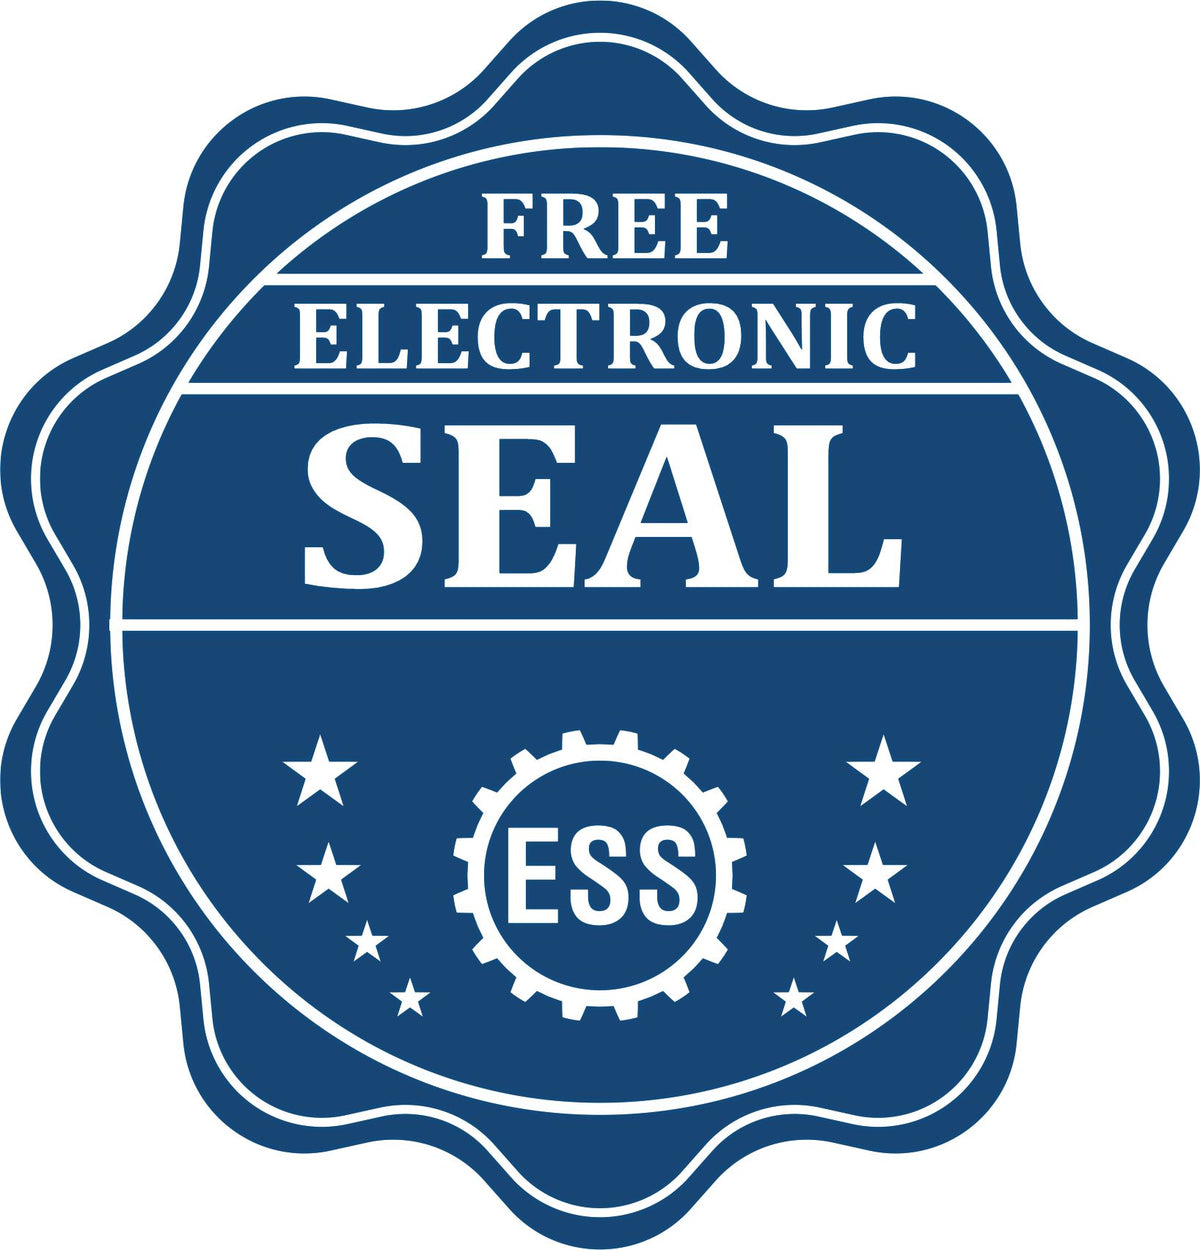 A badge showing a free electronic seal for the Gift Tennessee Engineer Seal with stars and the ESS gear on the emblem.